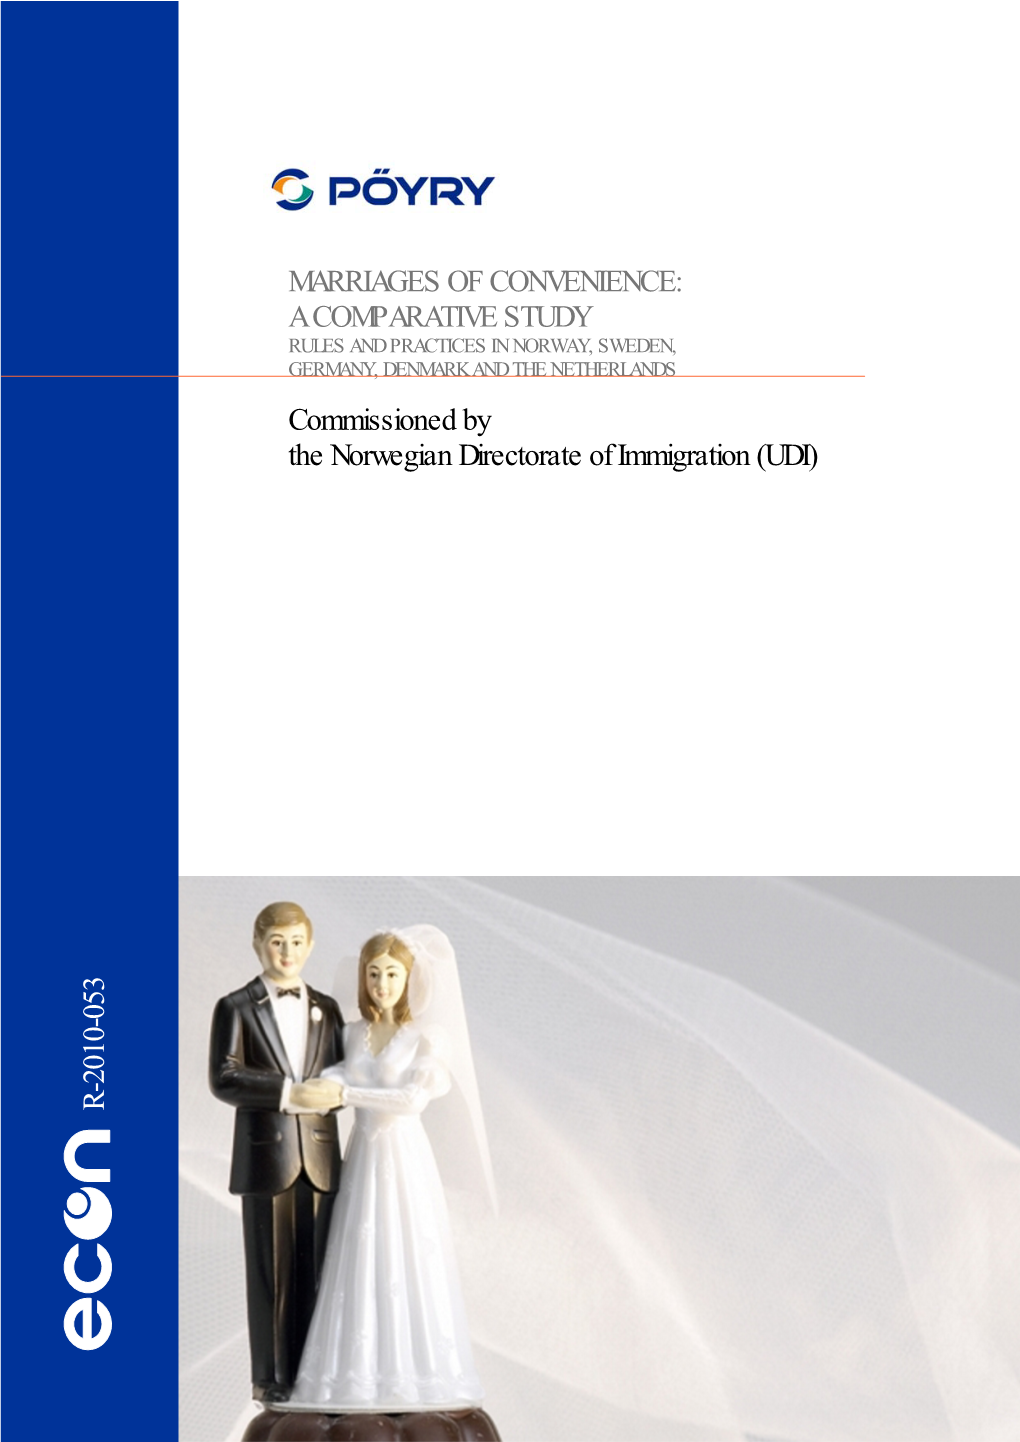 Marriages of Convenience: a Comparative Study